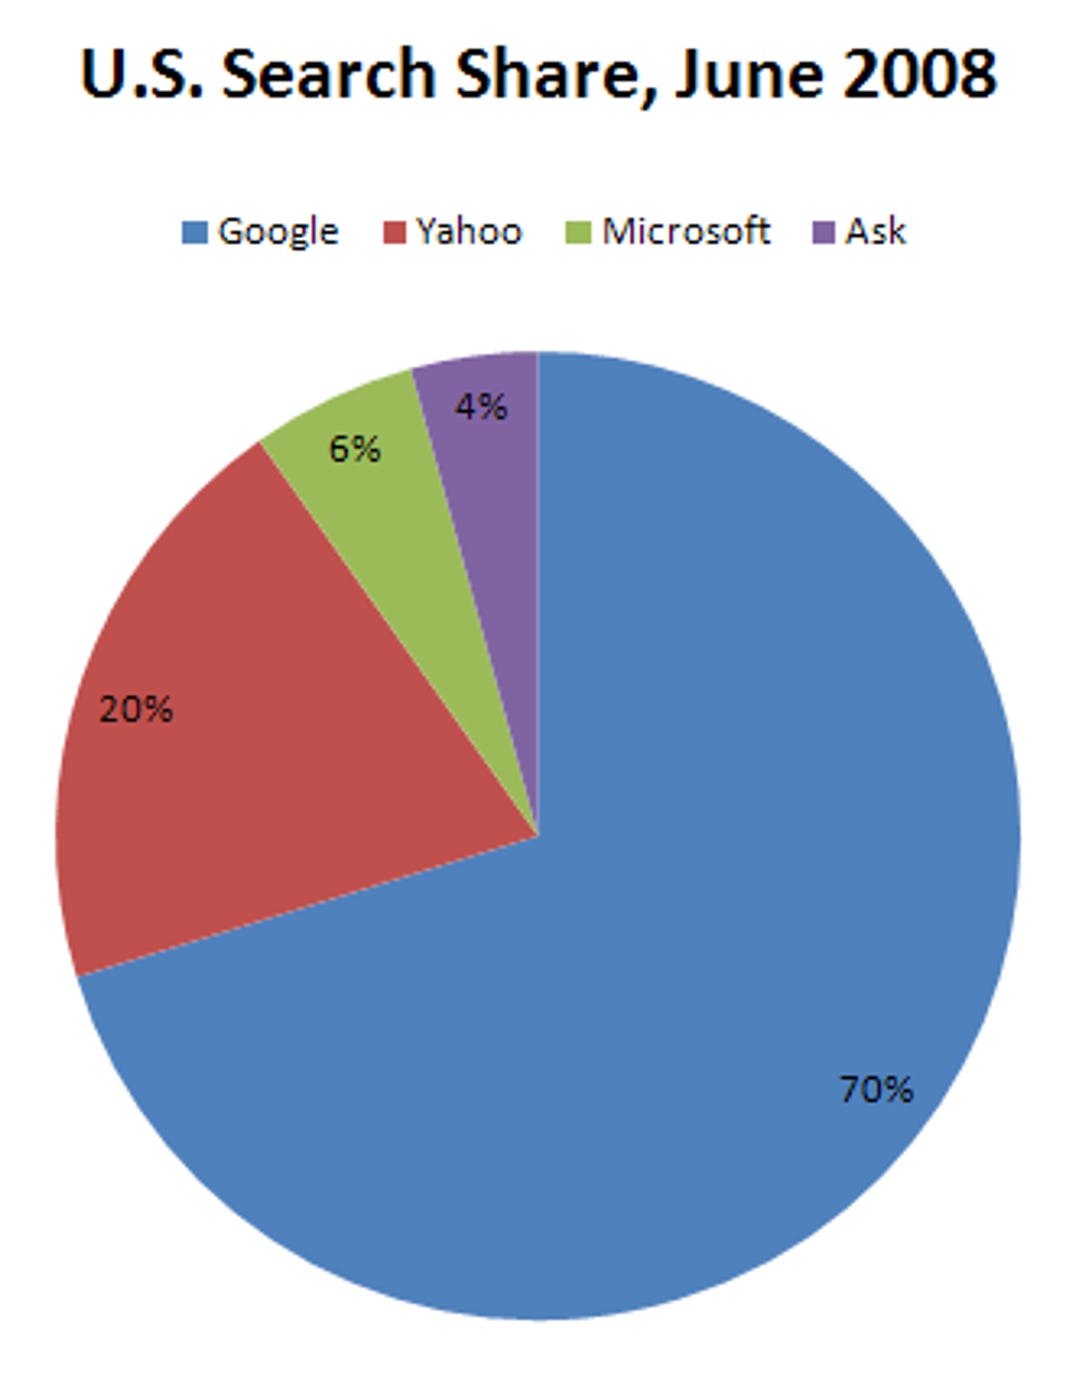 Google extended its lead of U.S. search market share.